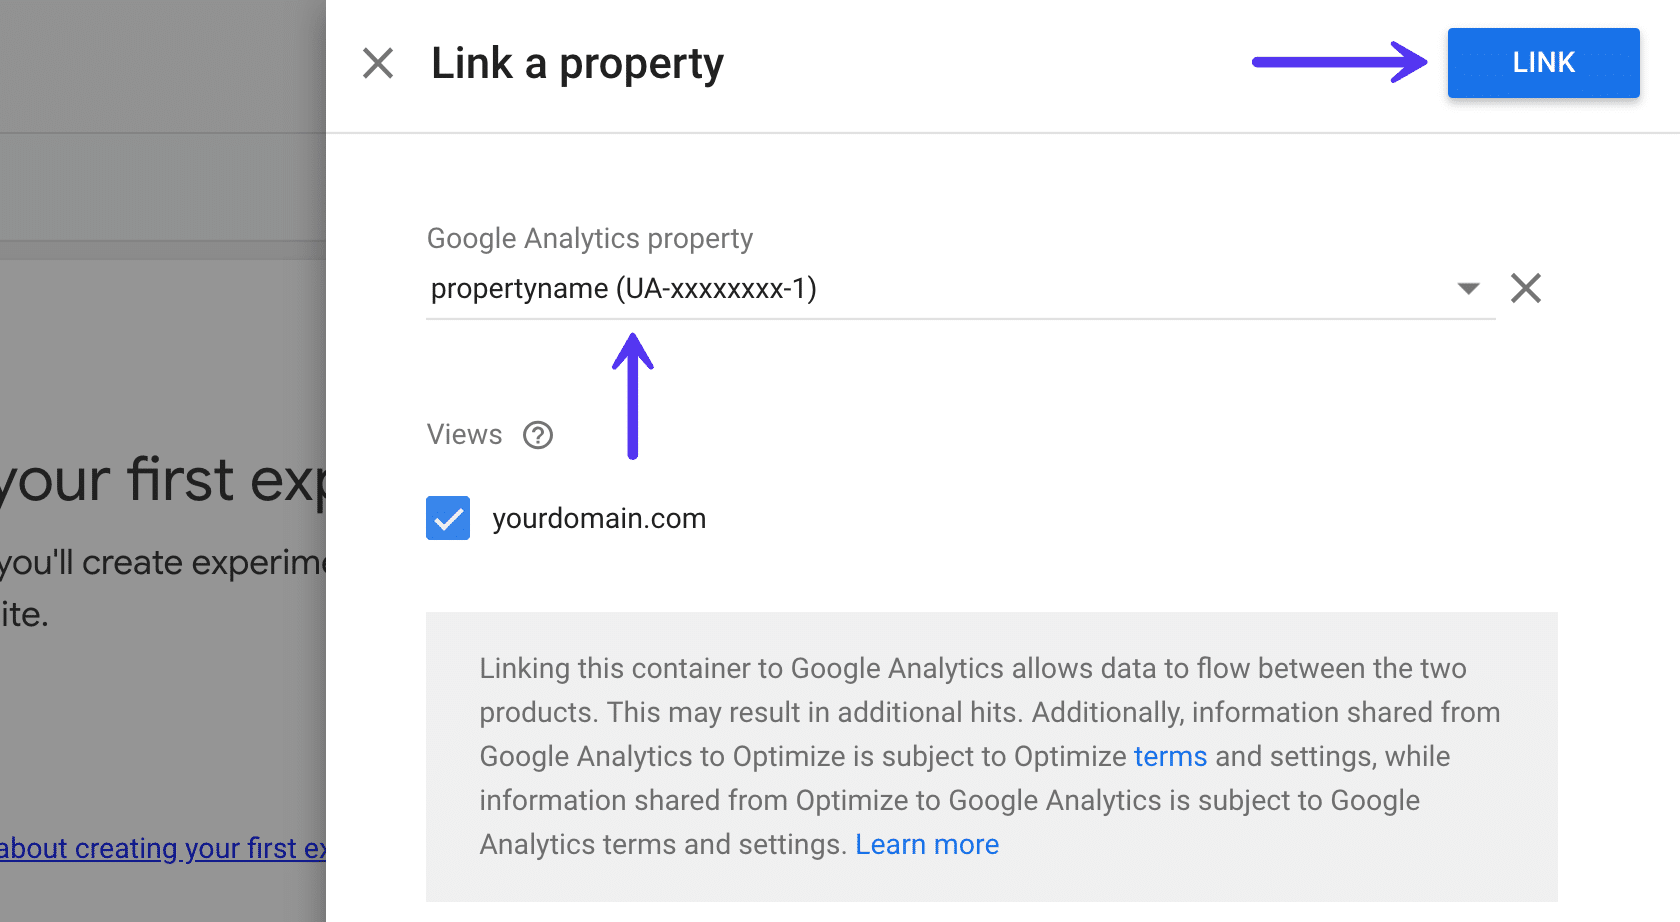 Link a property in Google Optimize